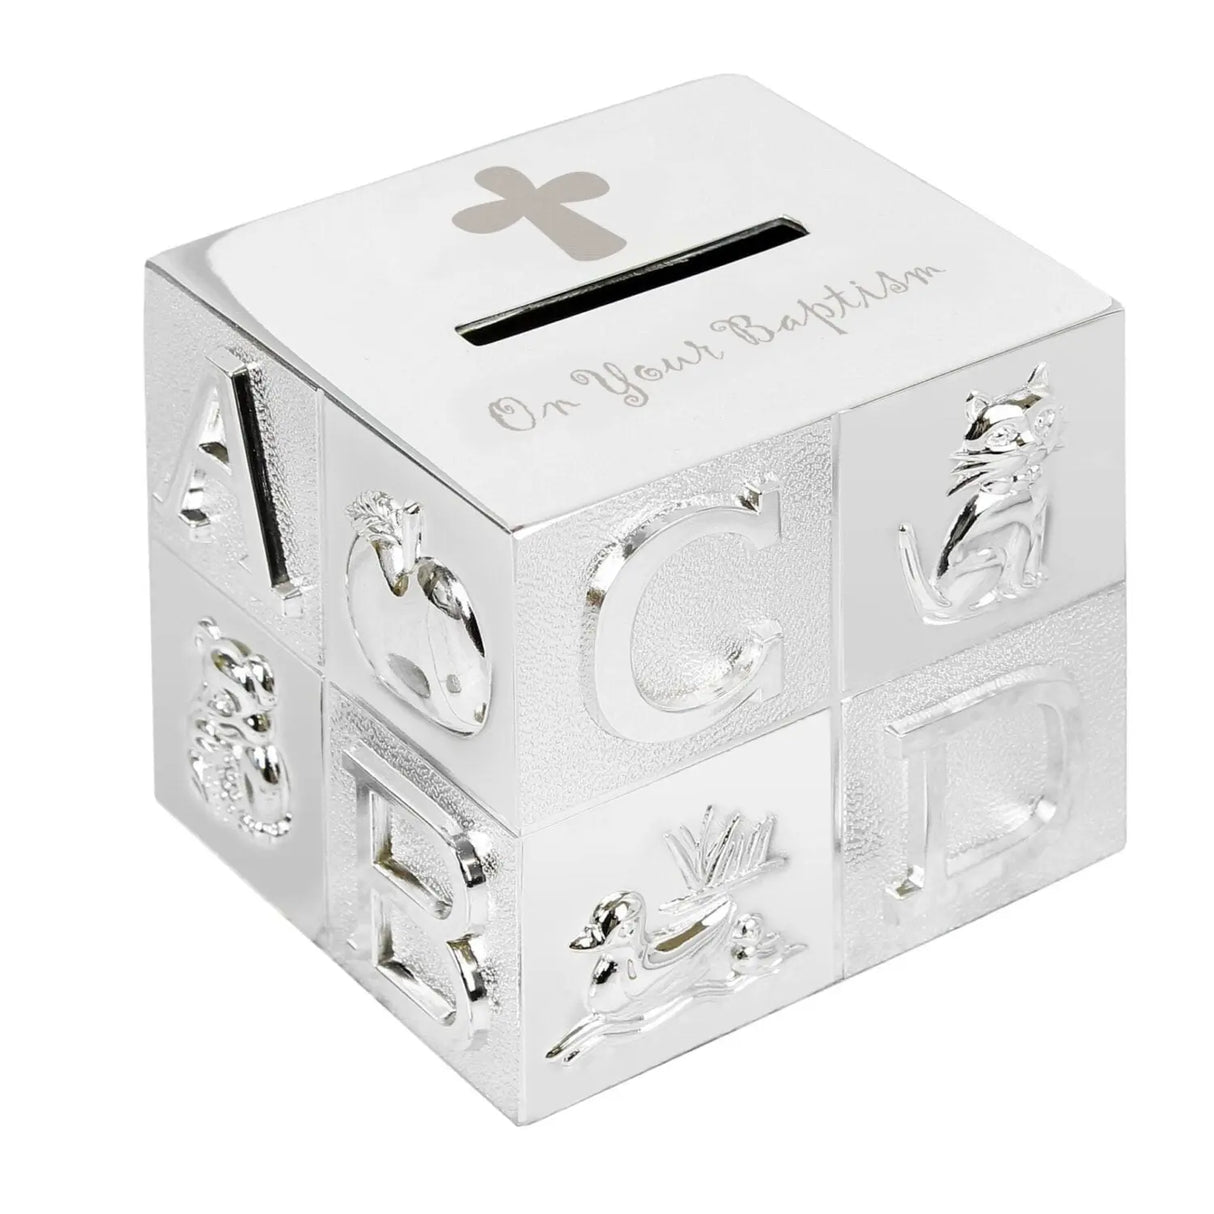 On Your Baptism Silver Plated ABC Money Box - Gift Moments